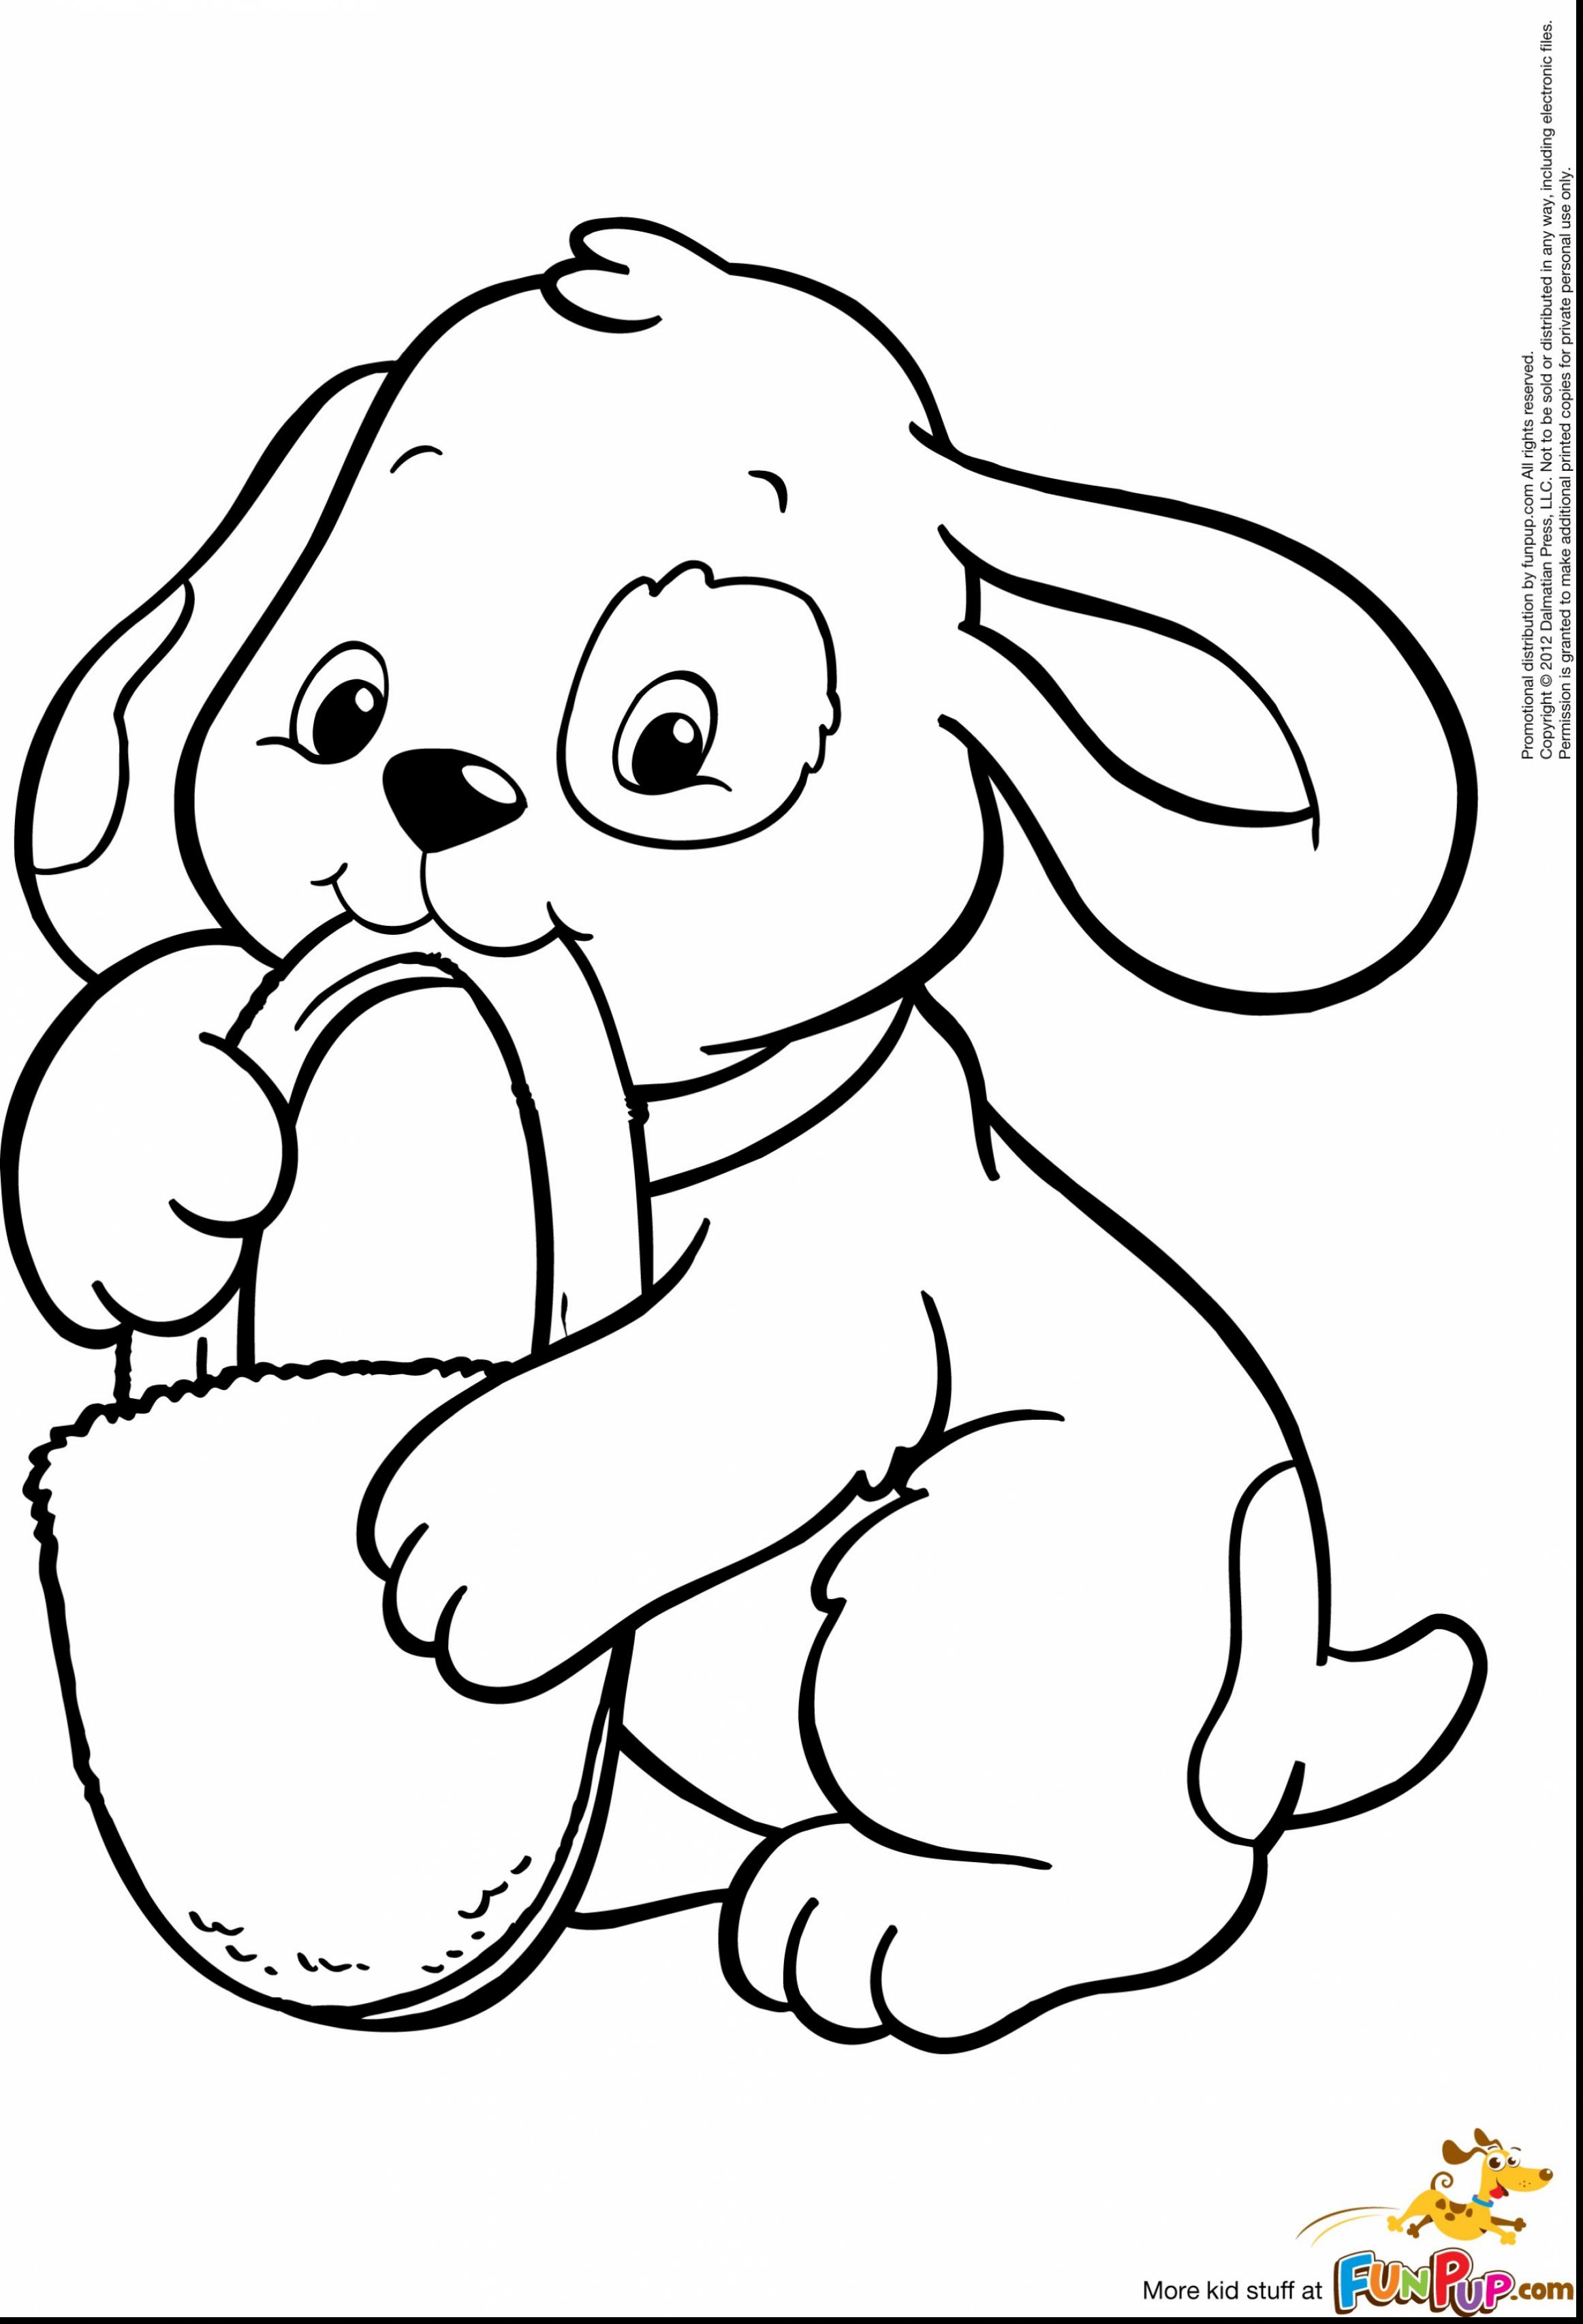 puppy-cute-5-coloring-pages-free-printable-coloring-pages